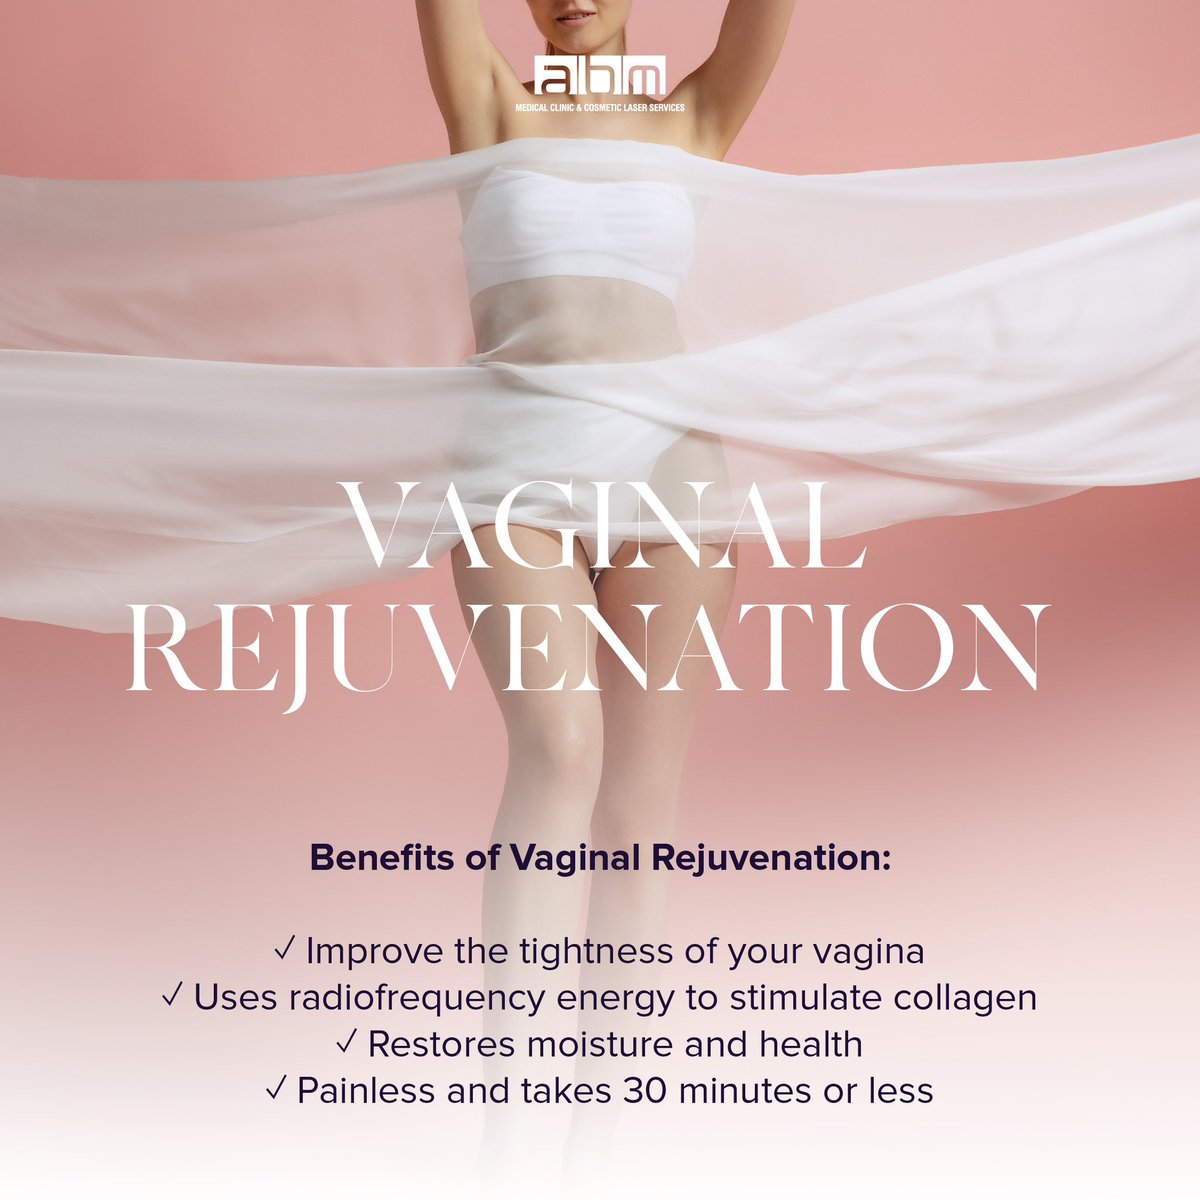 Vaginal Rejuvenation All procedures are performed by board certified physicians, can be done for cosmetic reasons or to solve age-related problems, such as lack of vaginal tightness, urinary incontinence while restoring moisture and health. Call  (818) 222-8042 #womenswellness